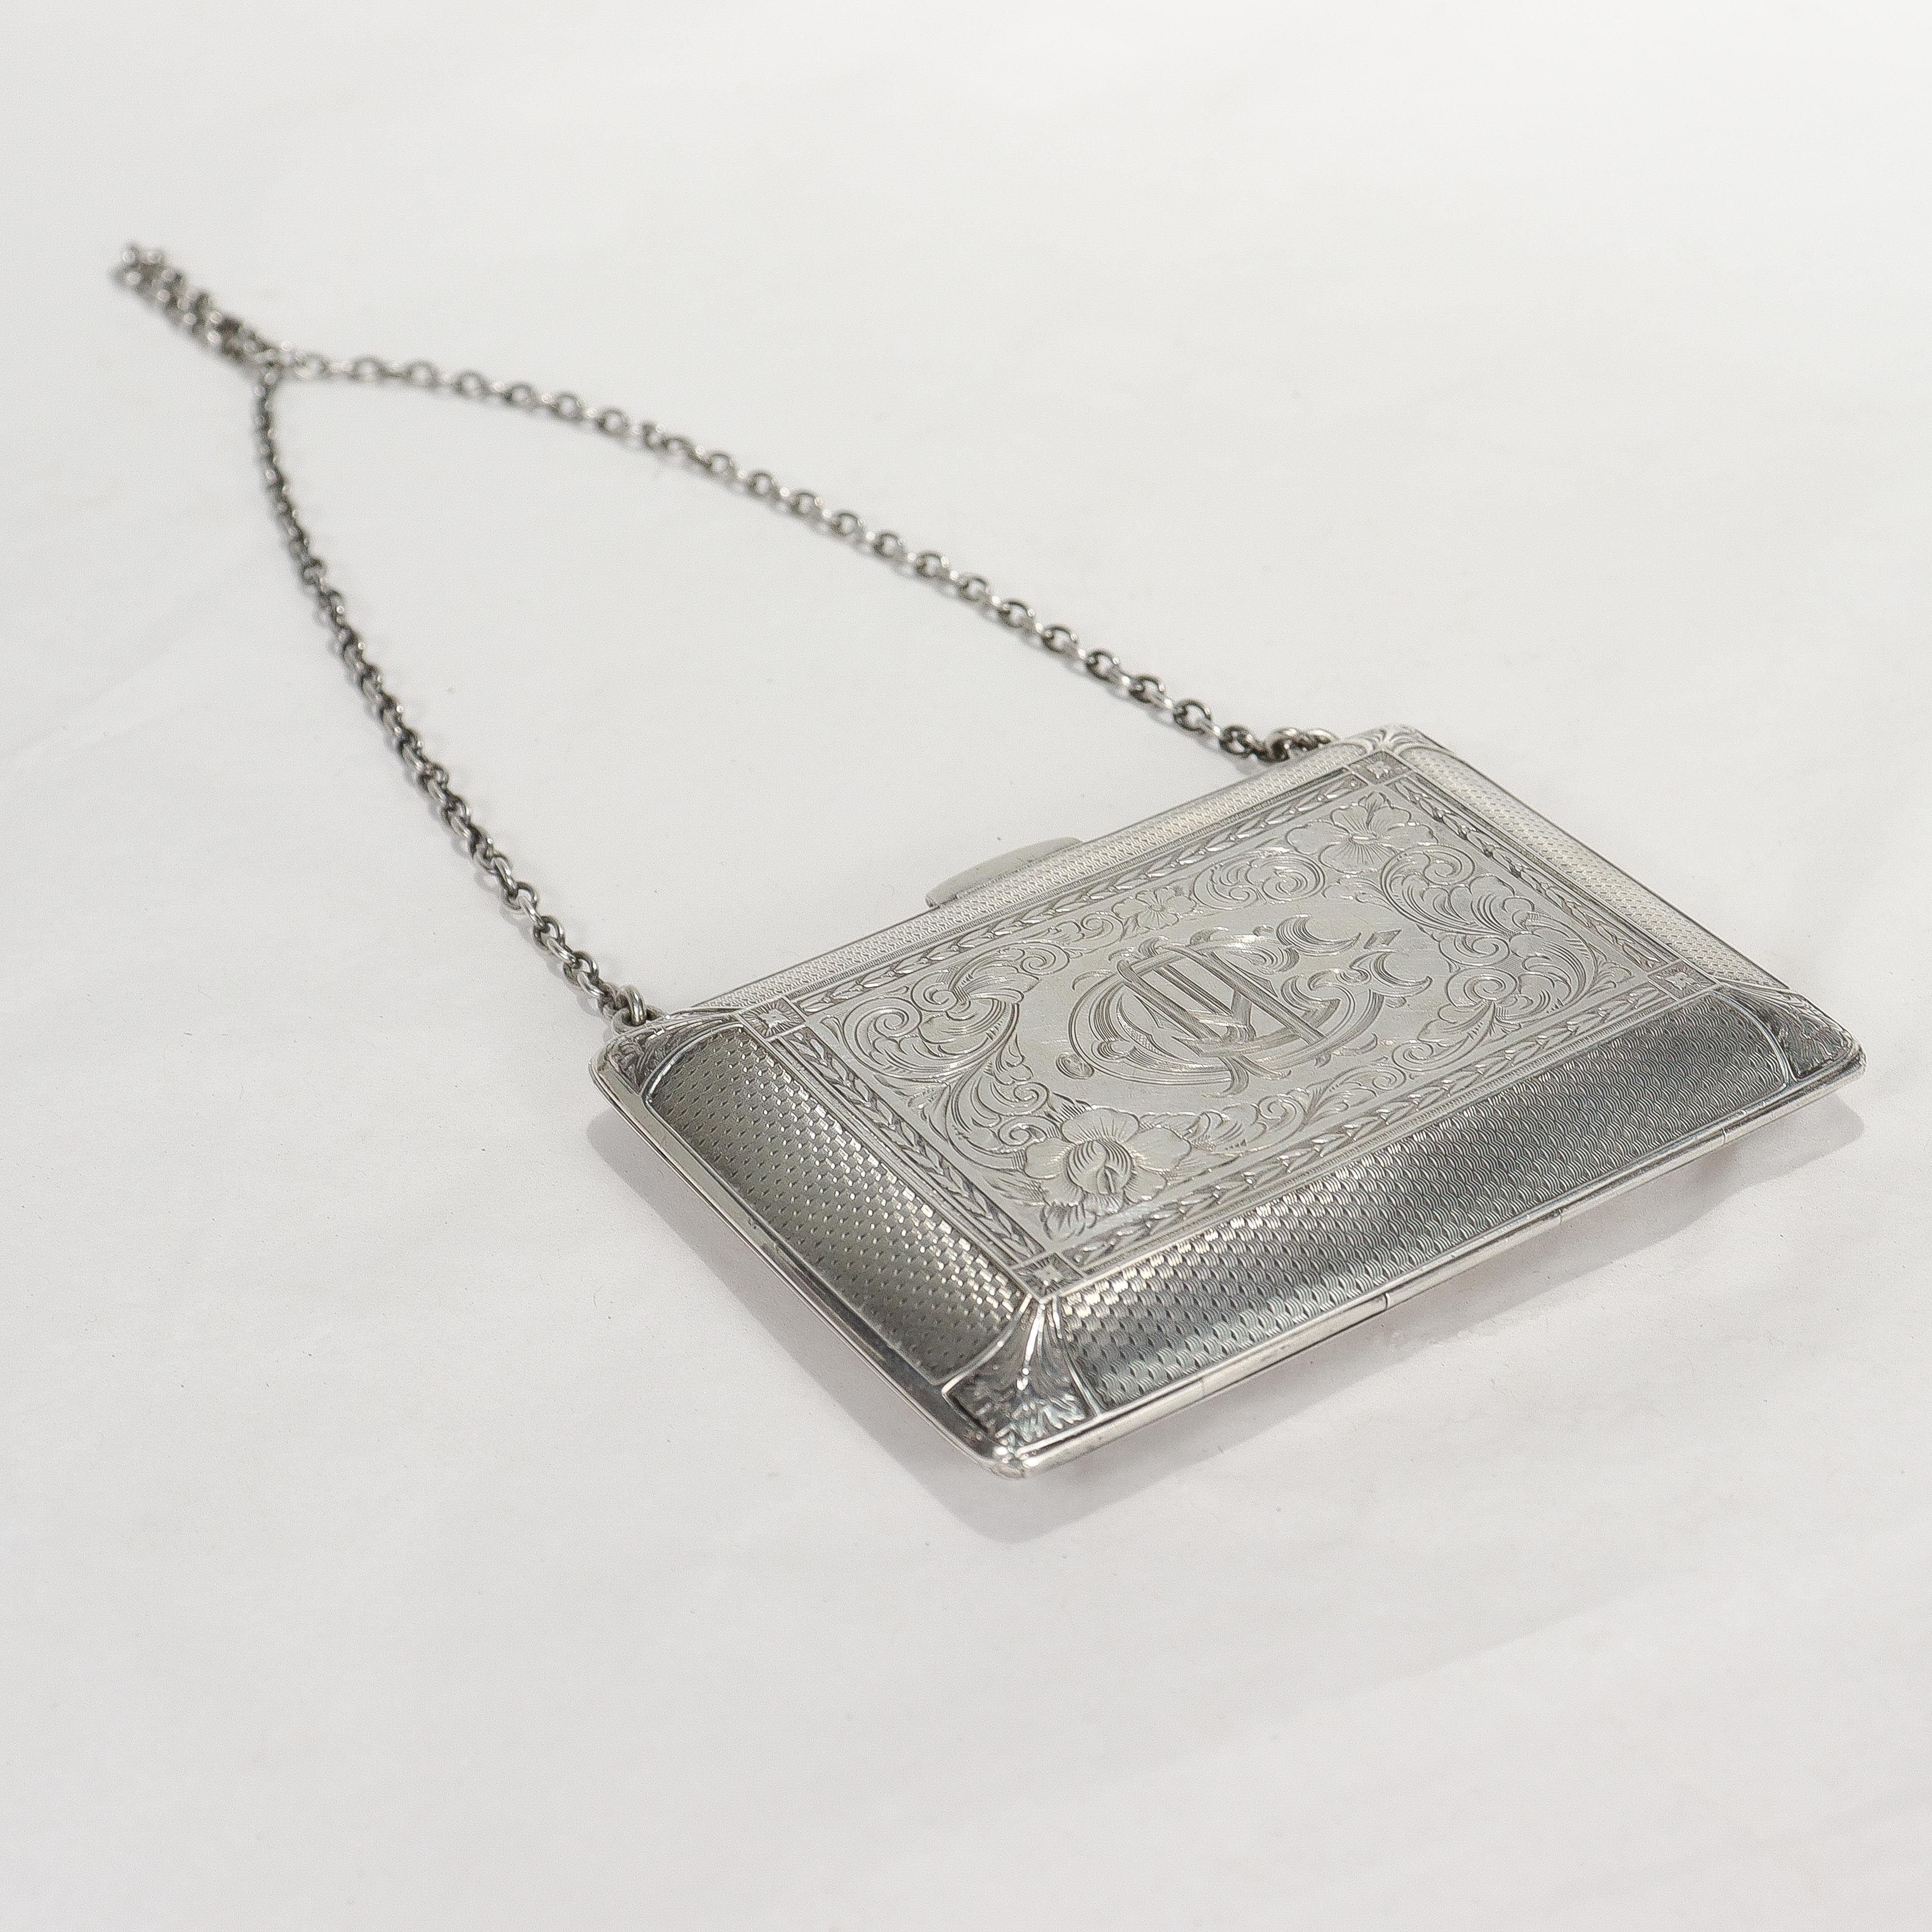 antique silver purse with chain